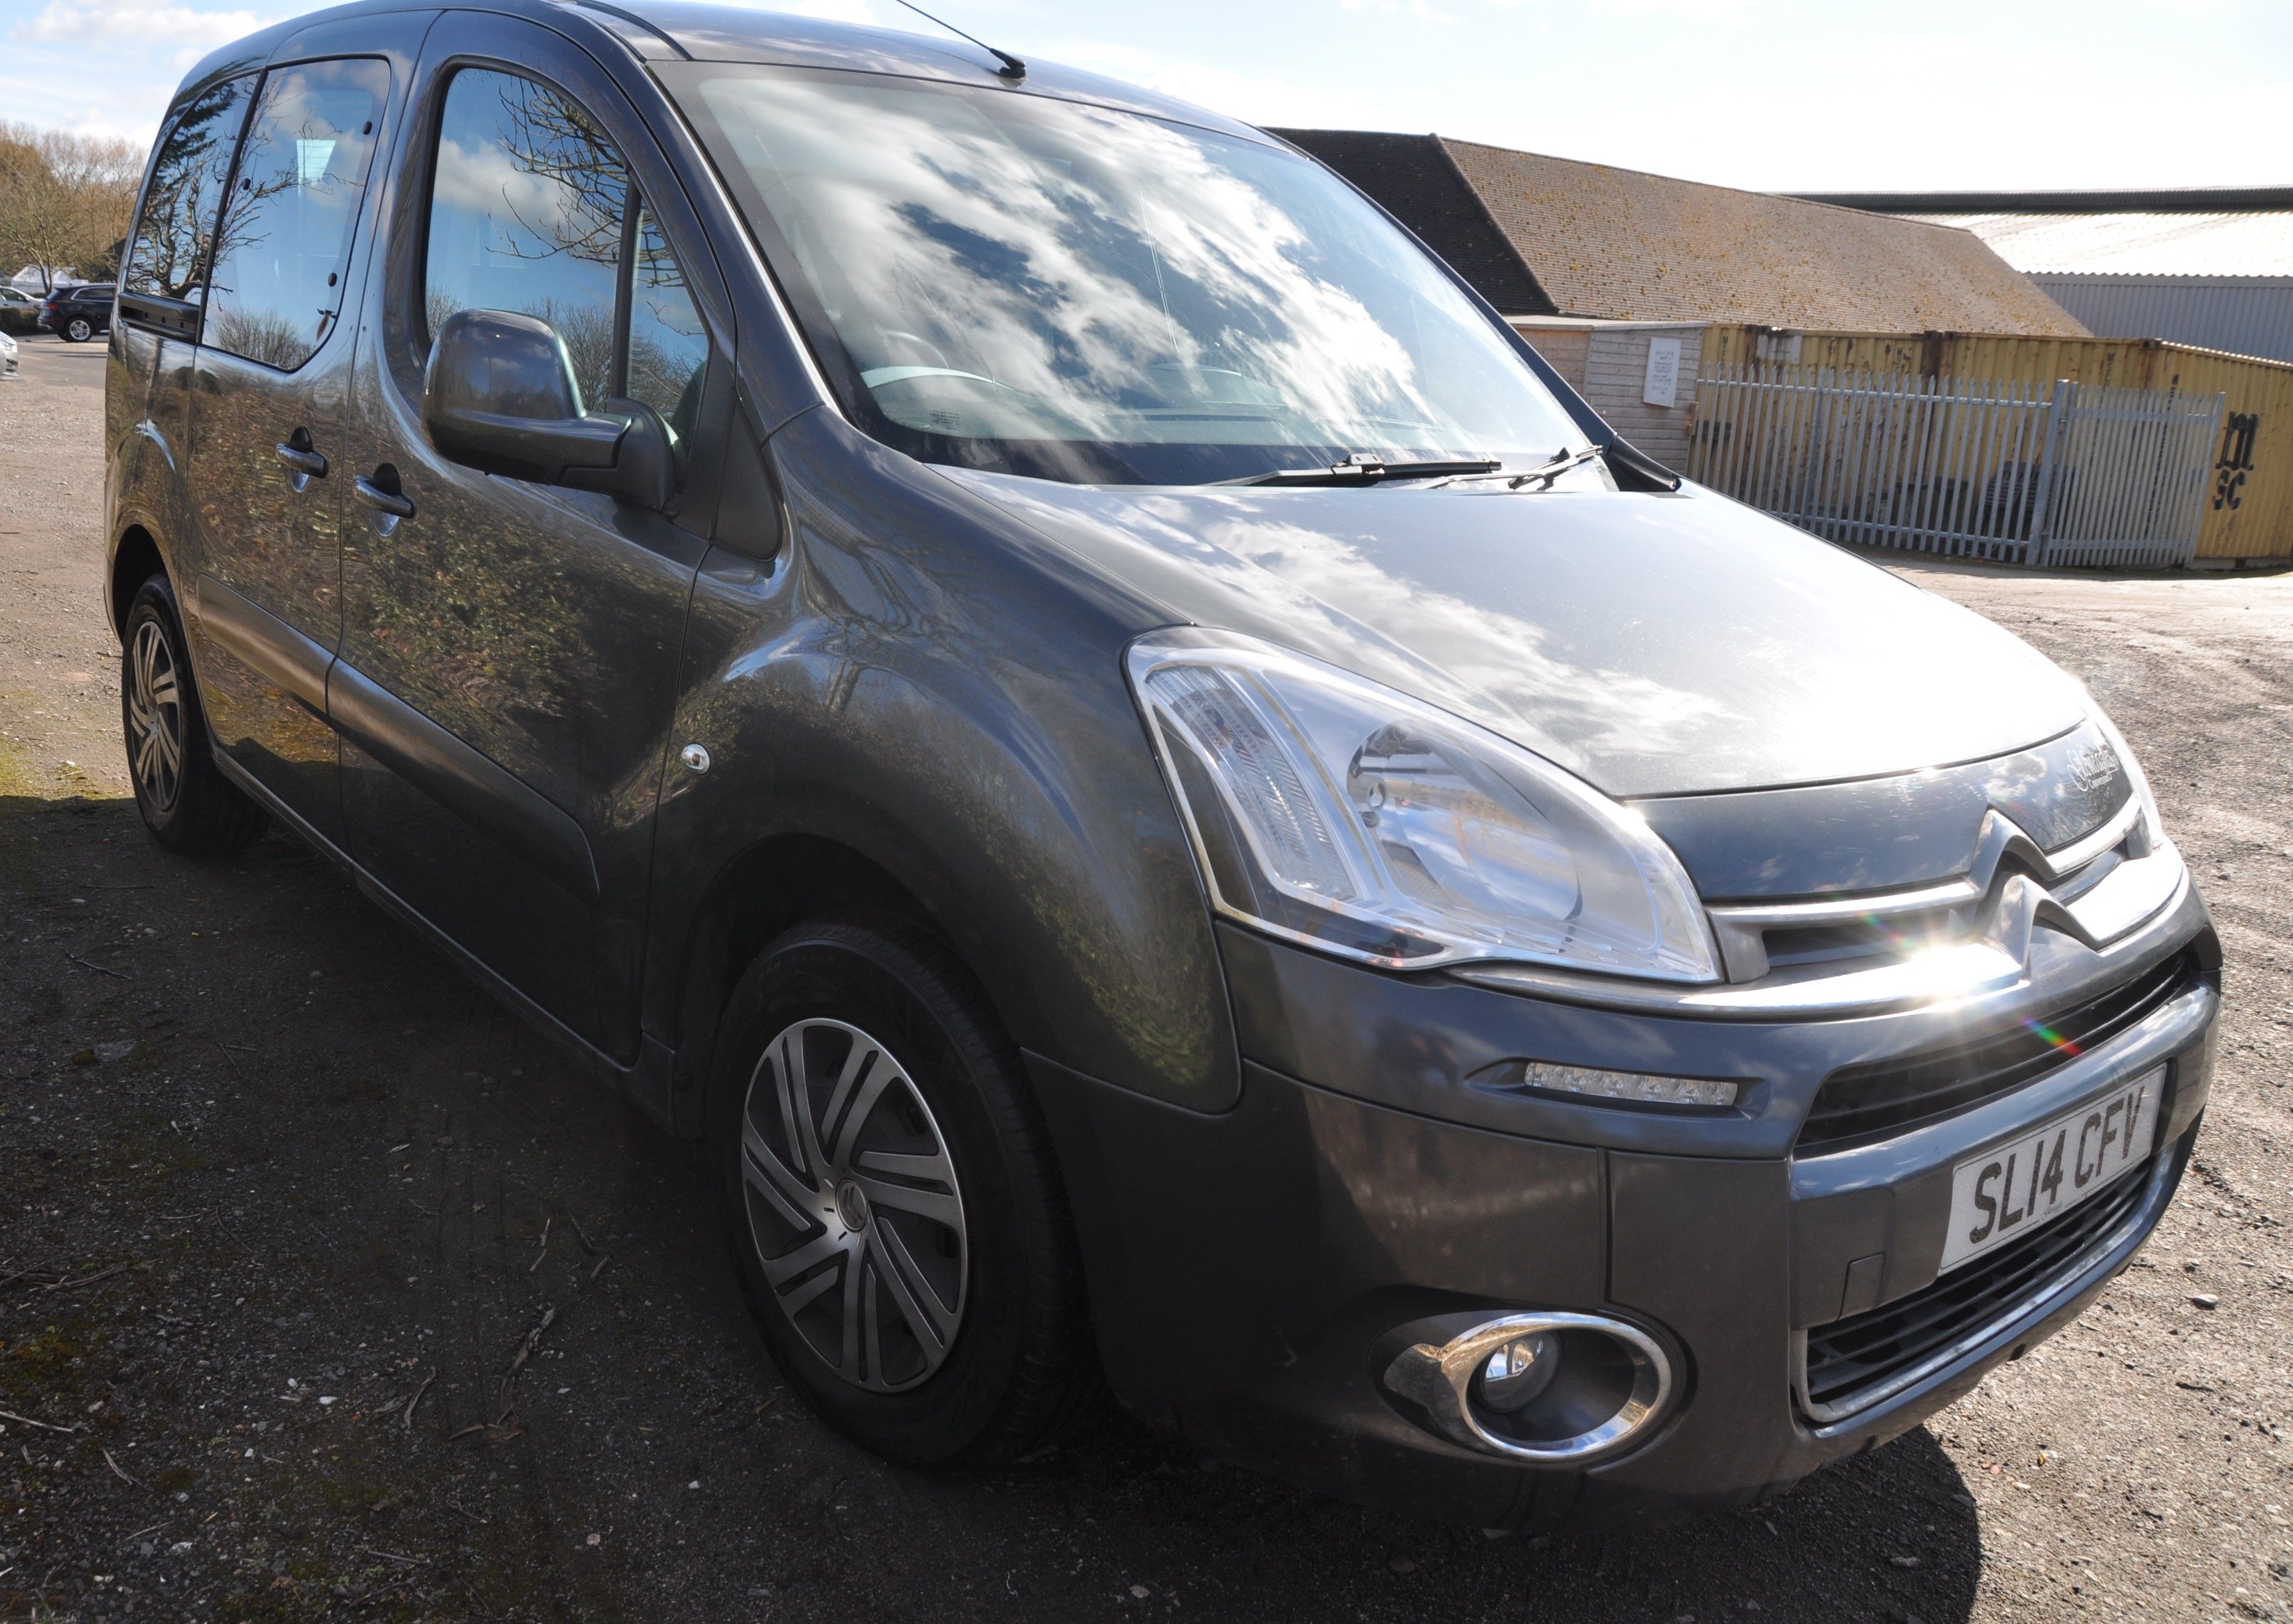 A 2014 CITROEN BERLINGO MULTISPACE GLENEAGLES CONVERSION in grey with two front and one rear seat - Image 3 of 11